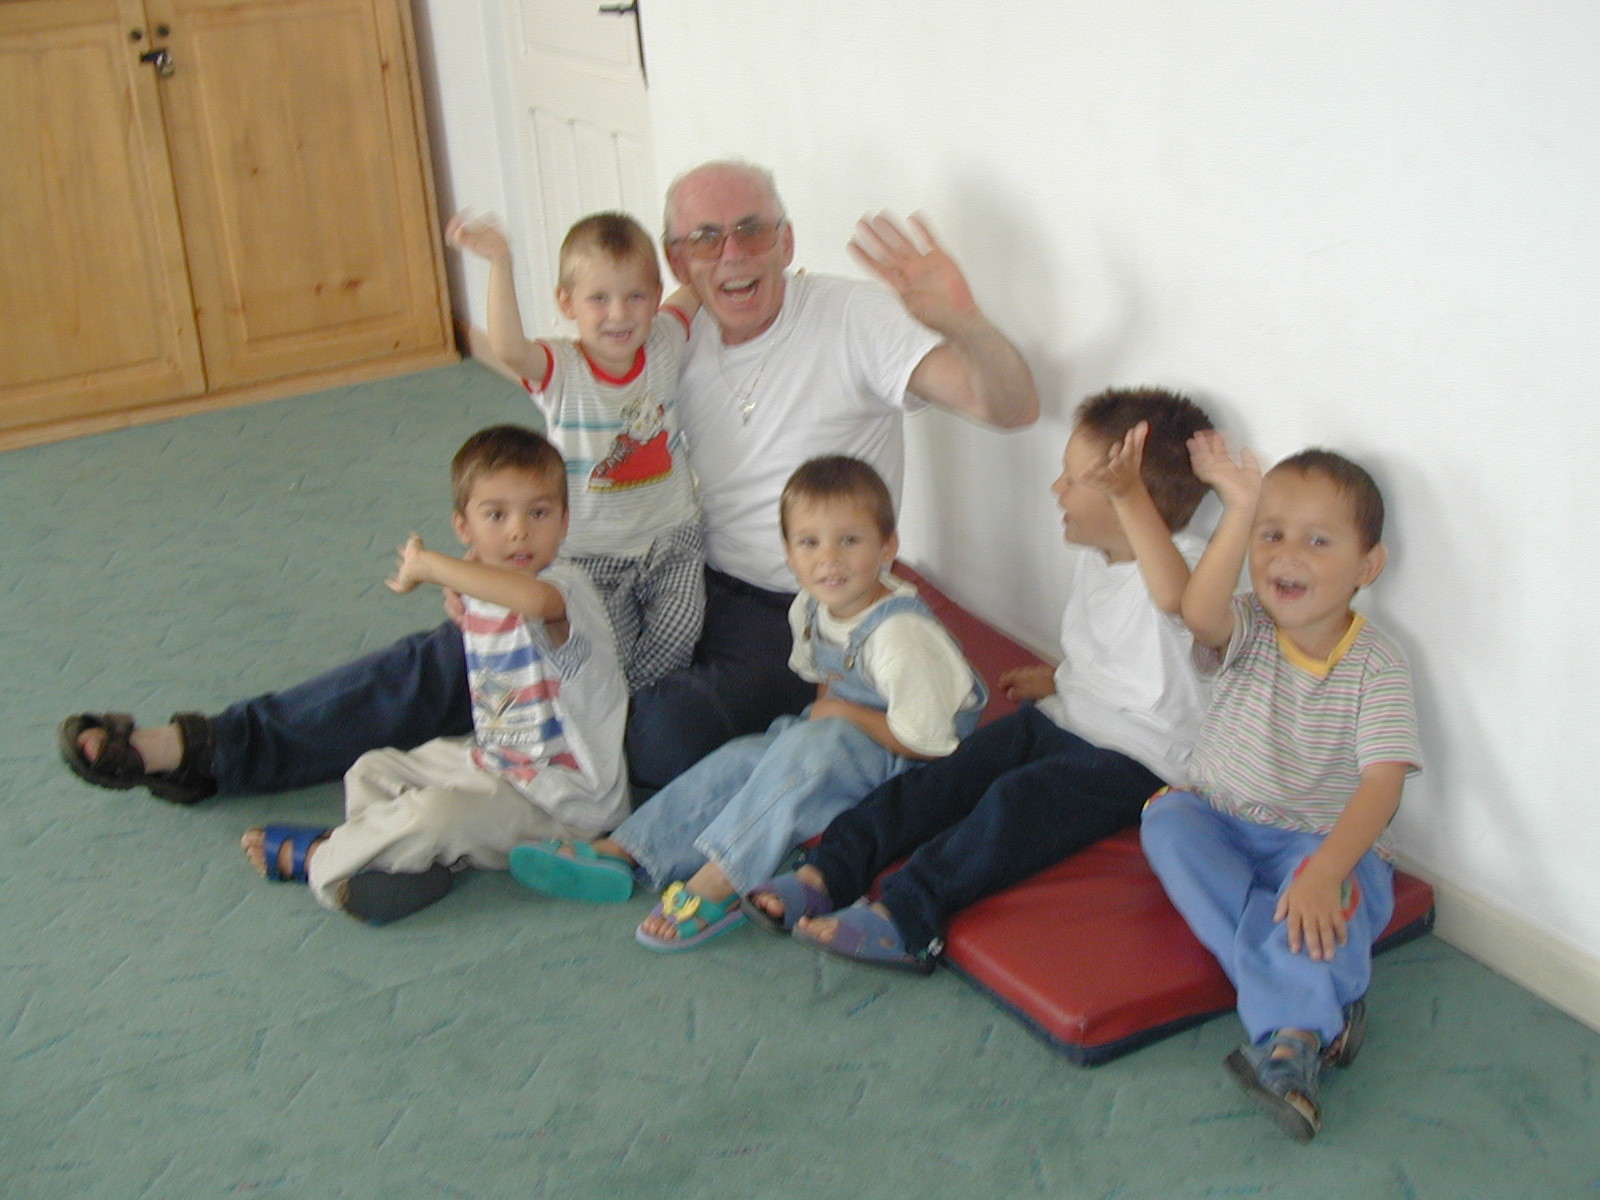 Fr. John with children in the playroom at Bistritia.